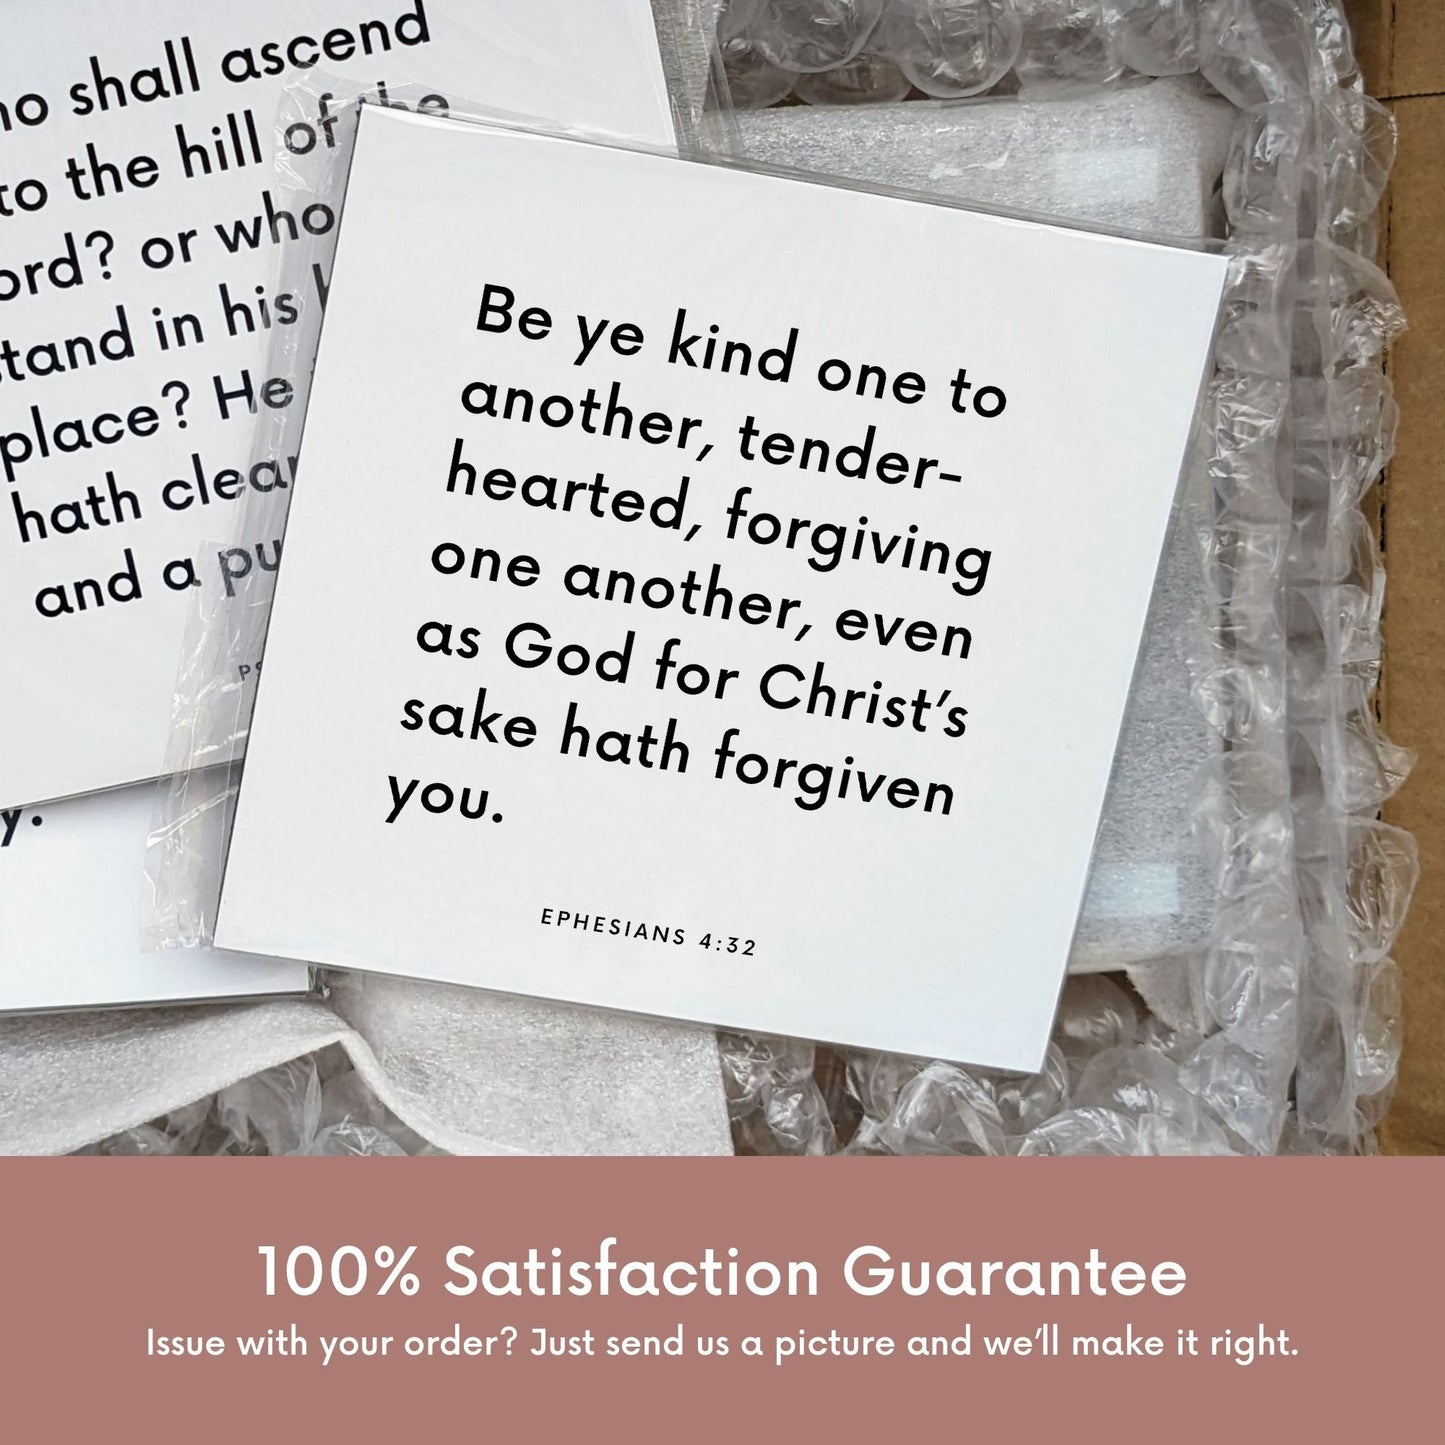 Shipping materials for scripture tile of Ephesians 4:32 - "Be ye kind one to another, tenderhearted"